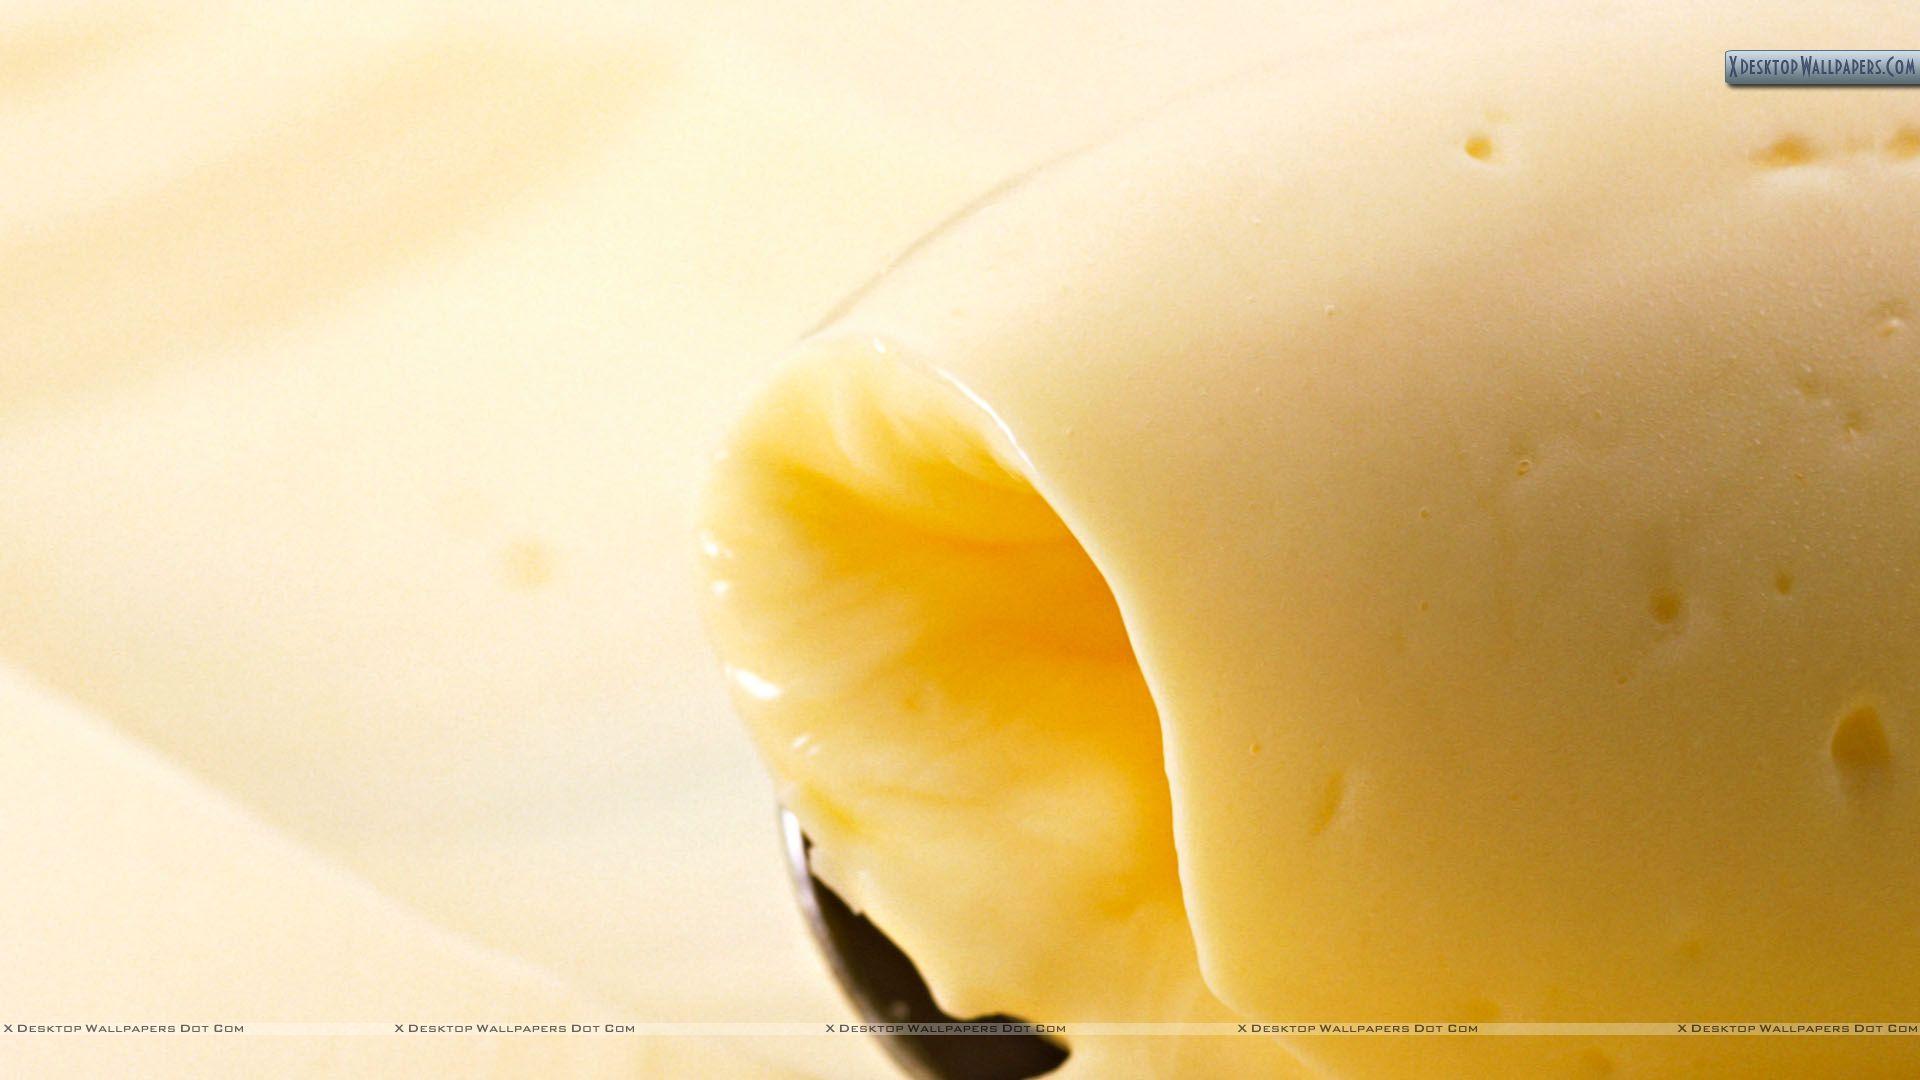 Download Butter wallpapers for mobile phone free Butter HD pictures